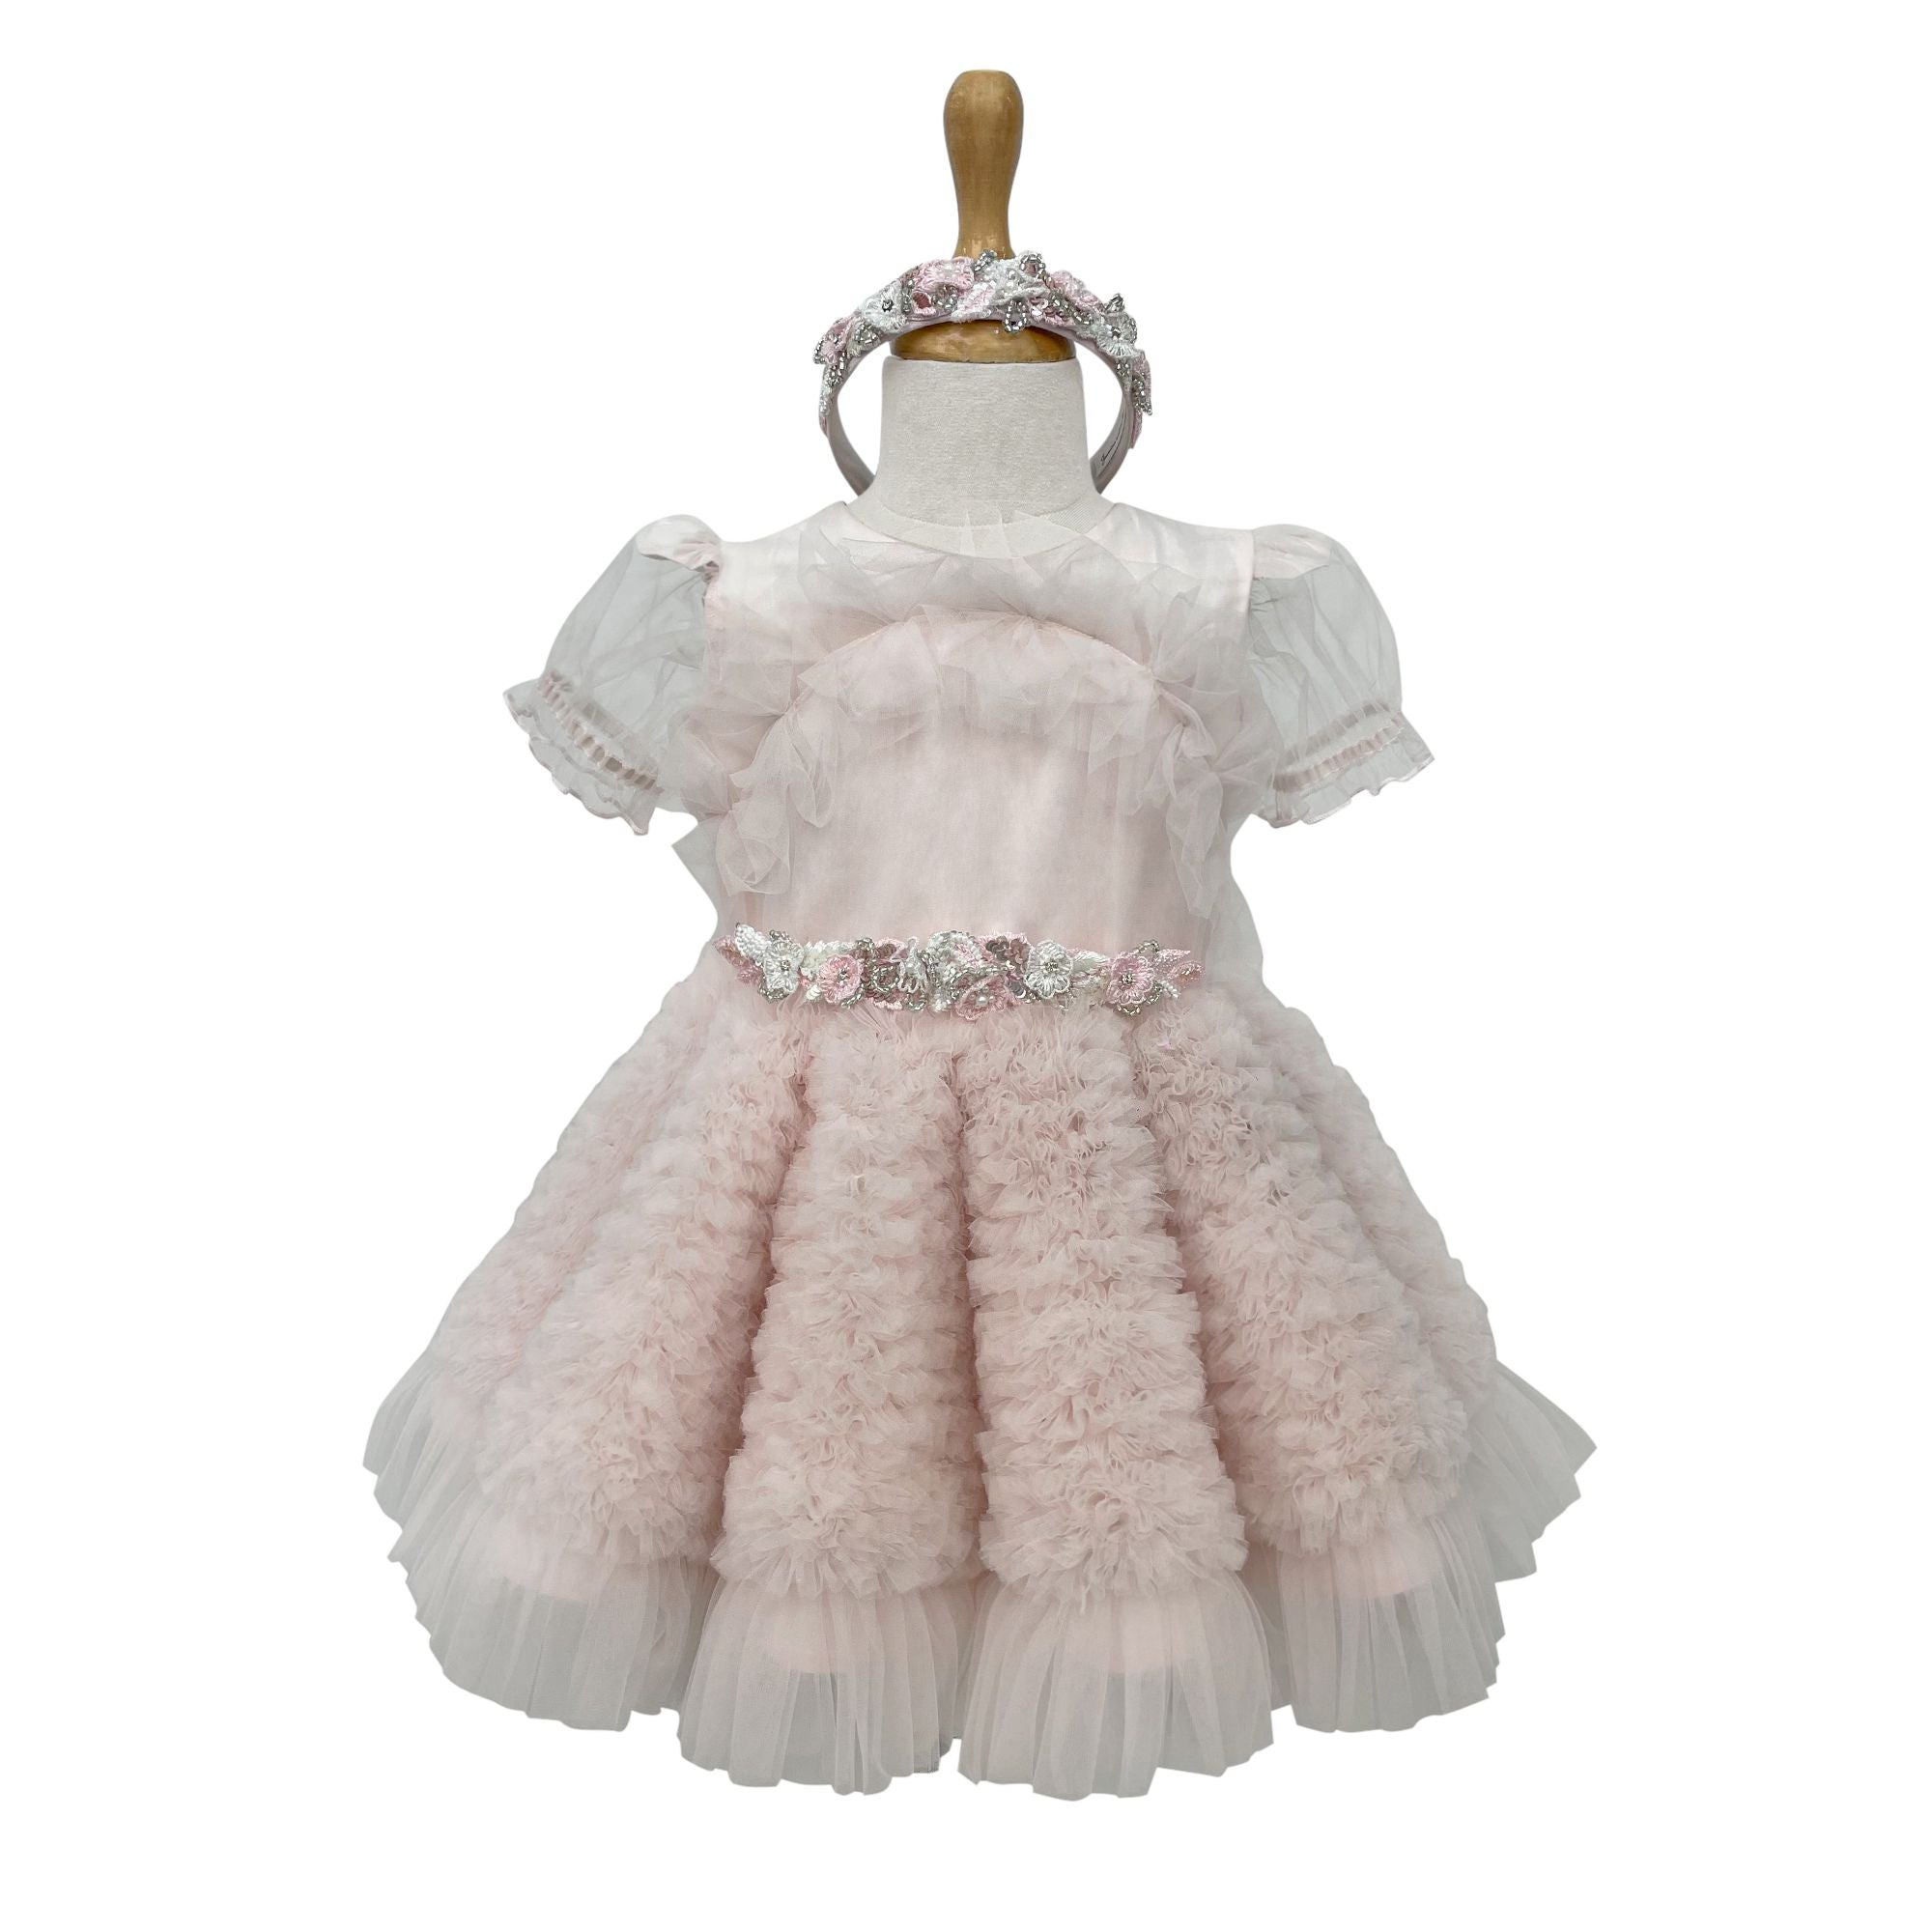 The Embellished Ariel Tulle Dress with Sleeves (Pink)